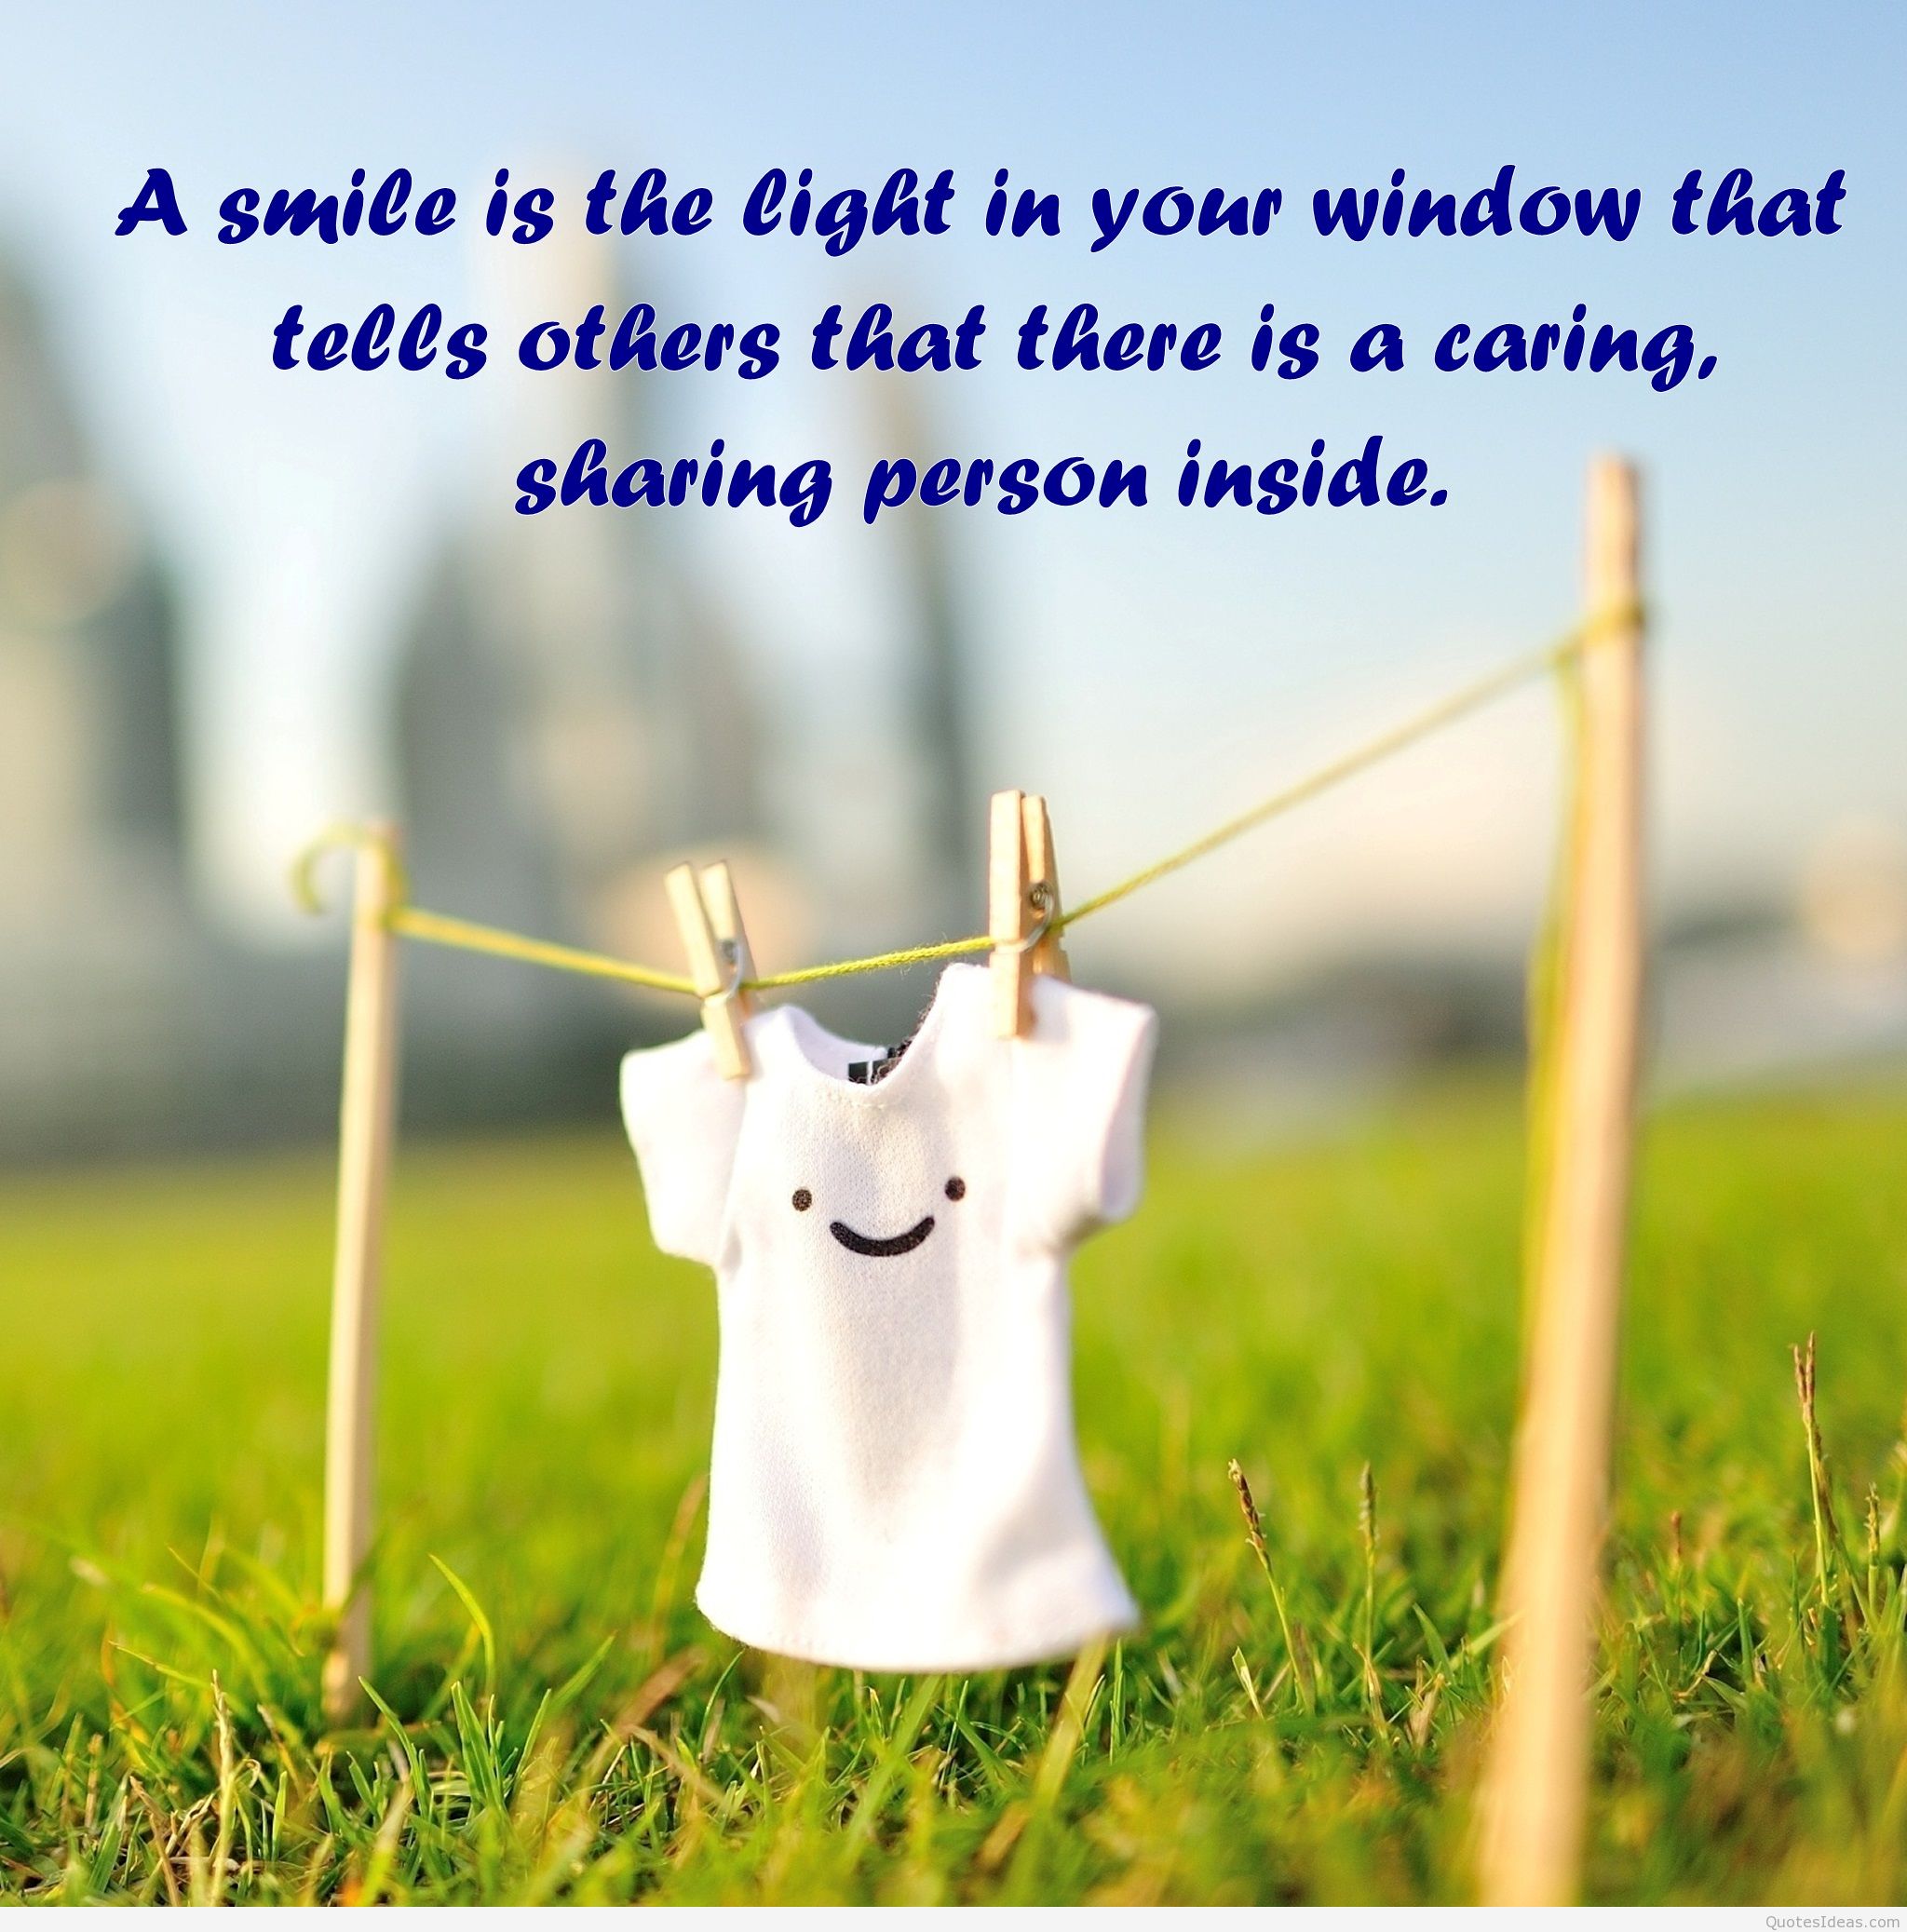 Smile Quotes Wallpaper And Image Be Happy